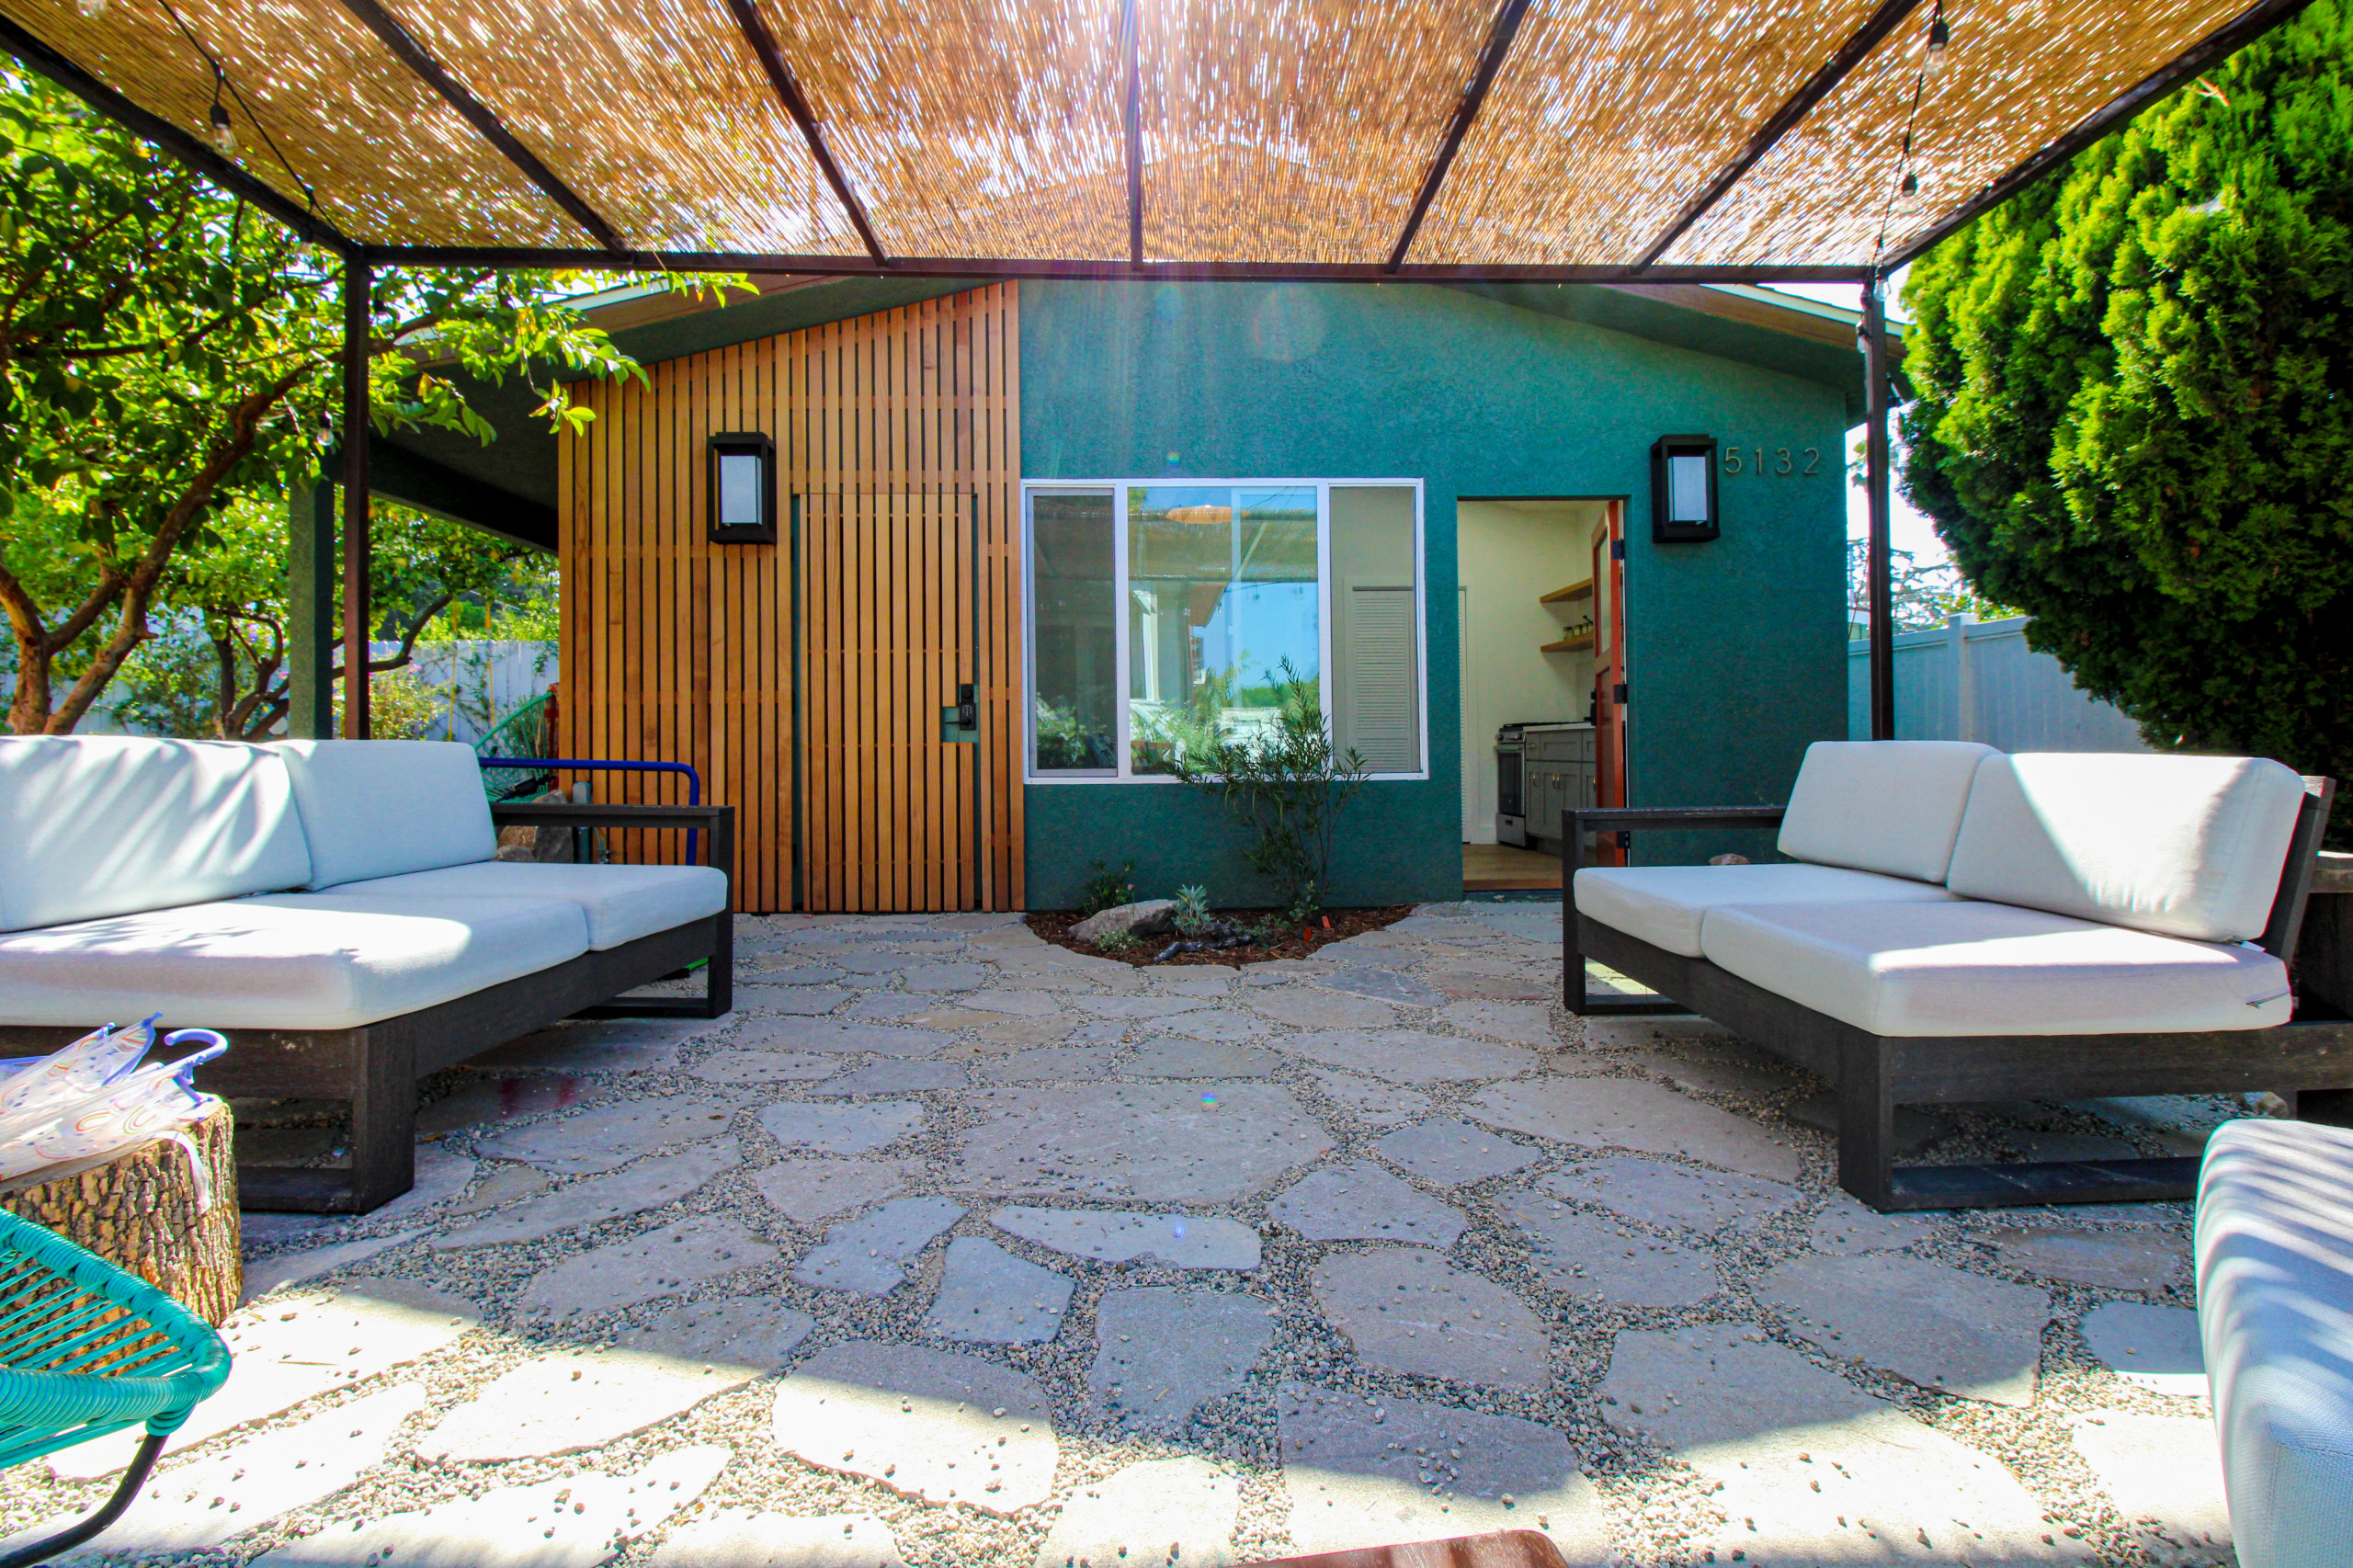 Eagle Rock, CA / Complete Accessory Dwelling Unit Build / Front Patio and Ent